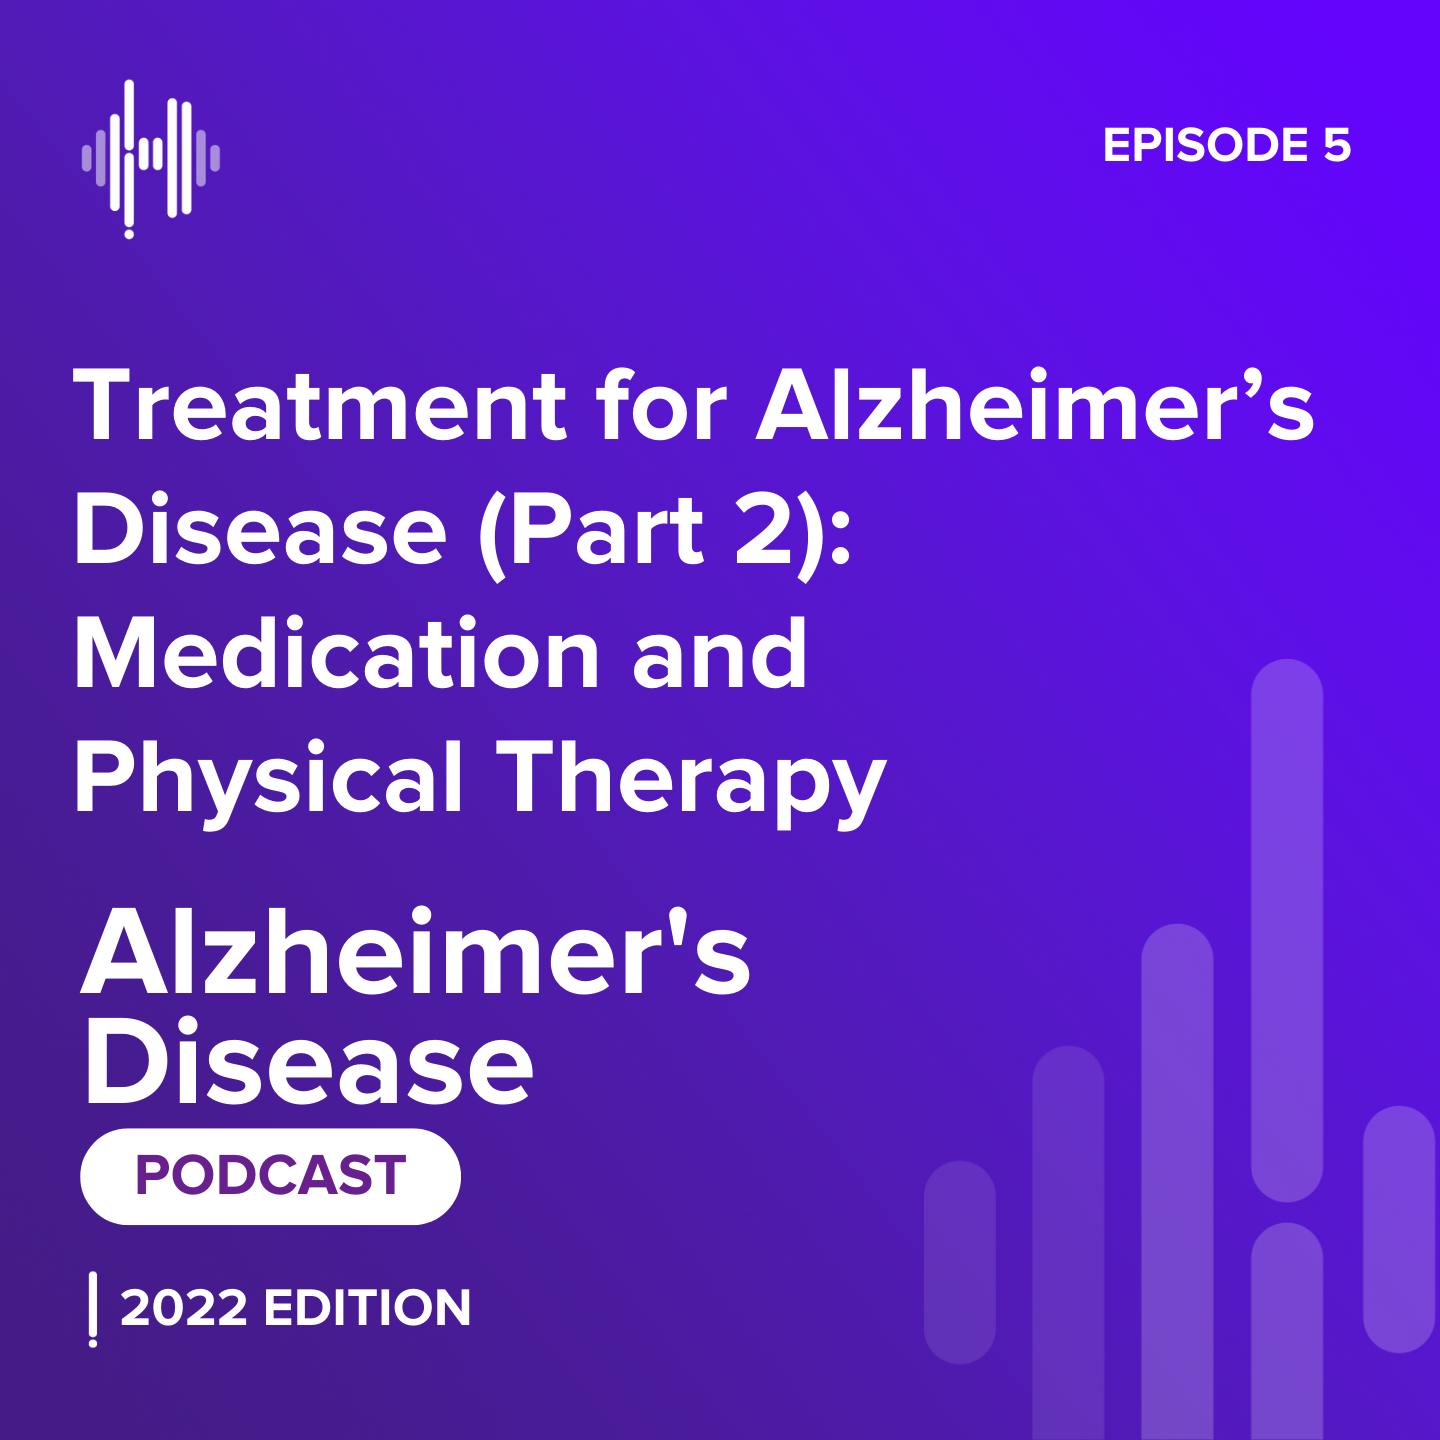 Ep 5: Treatment for Alzheimer’s Disease (Part 2):  Medication and Physical Therapy